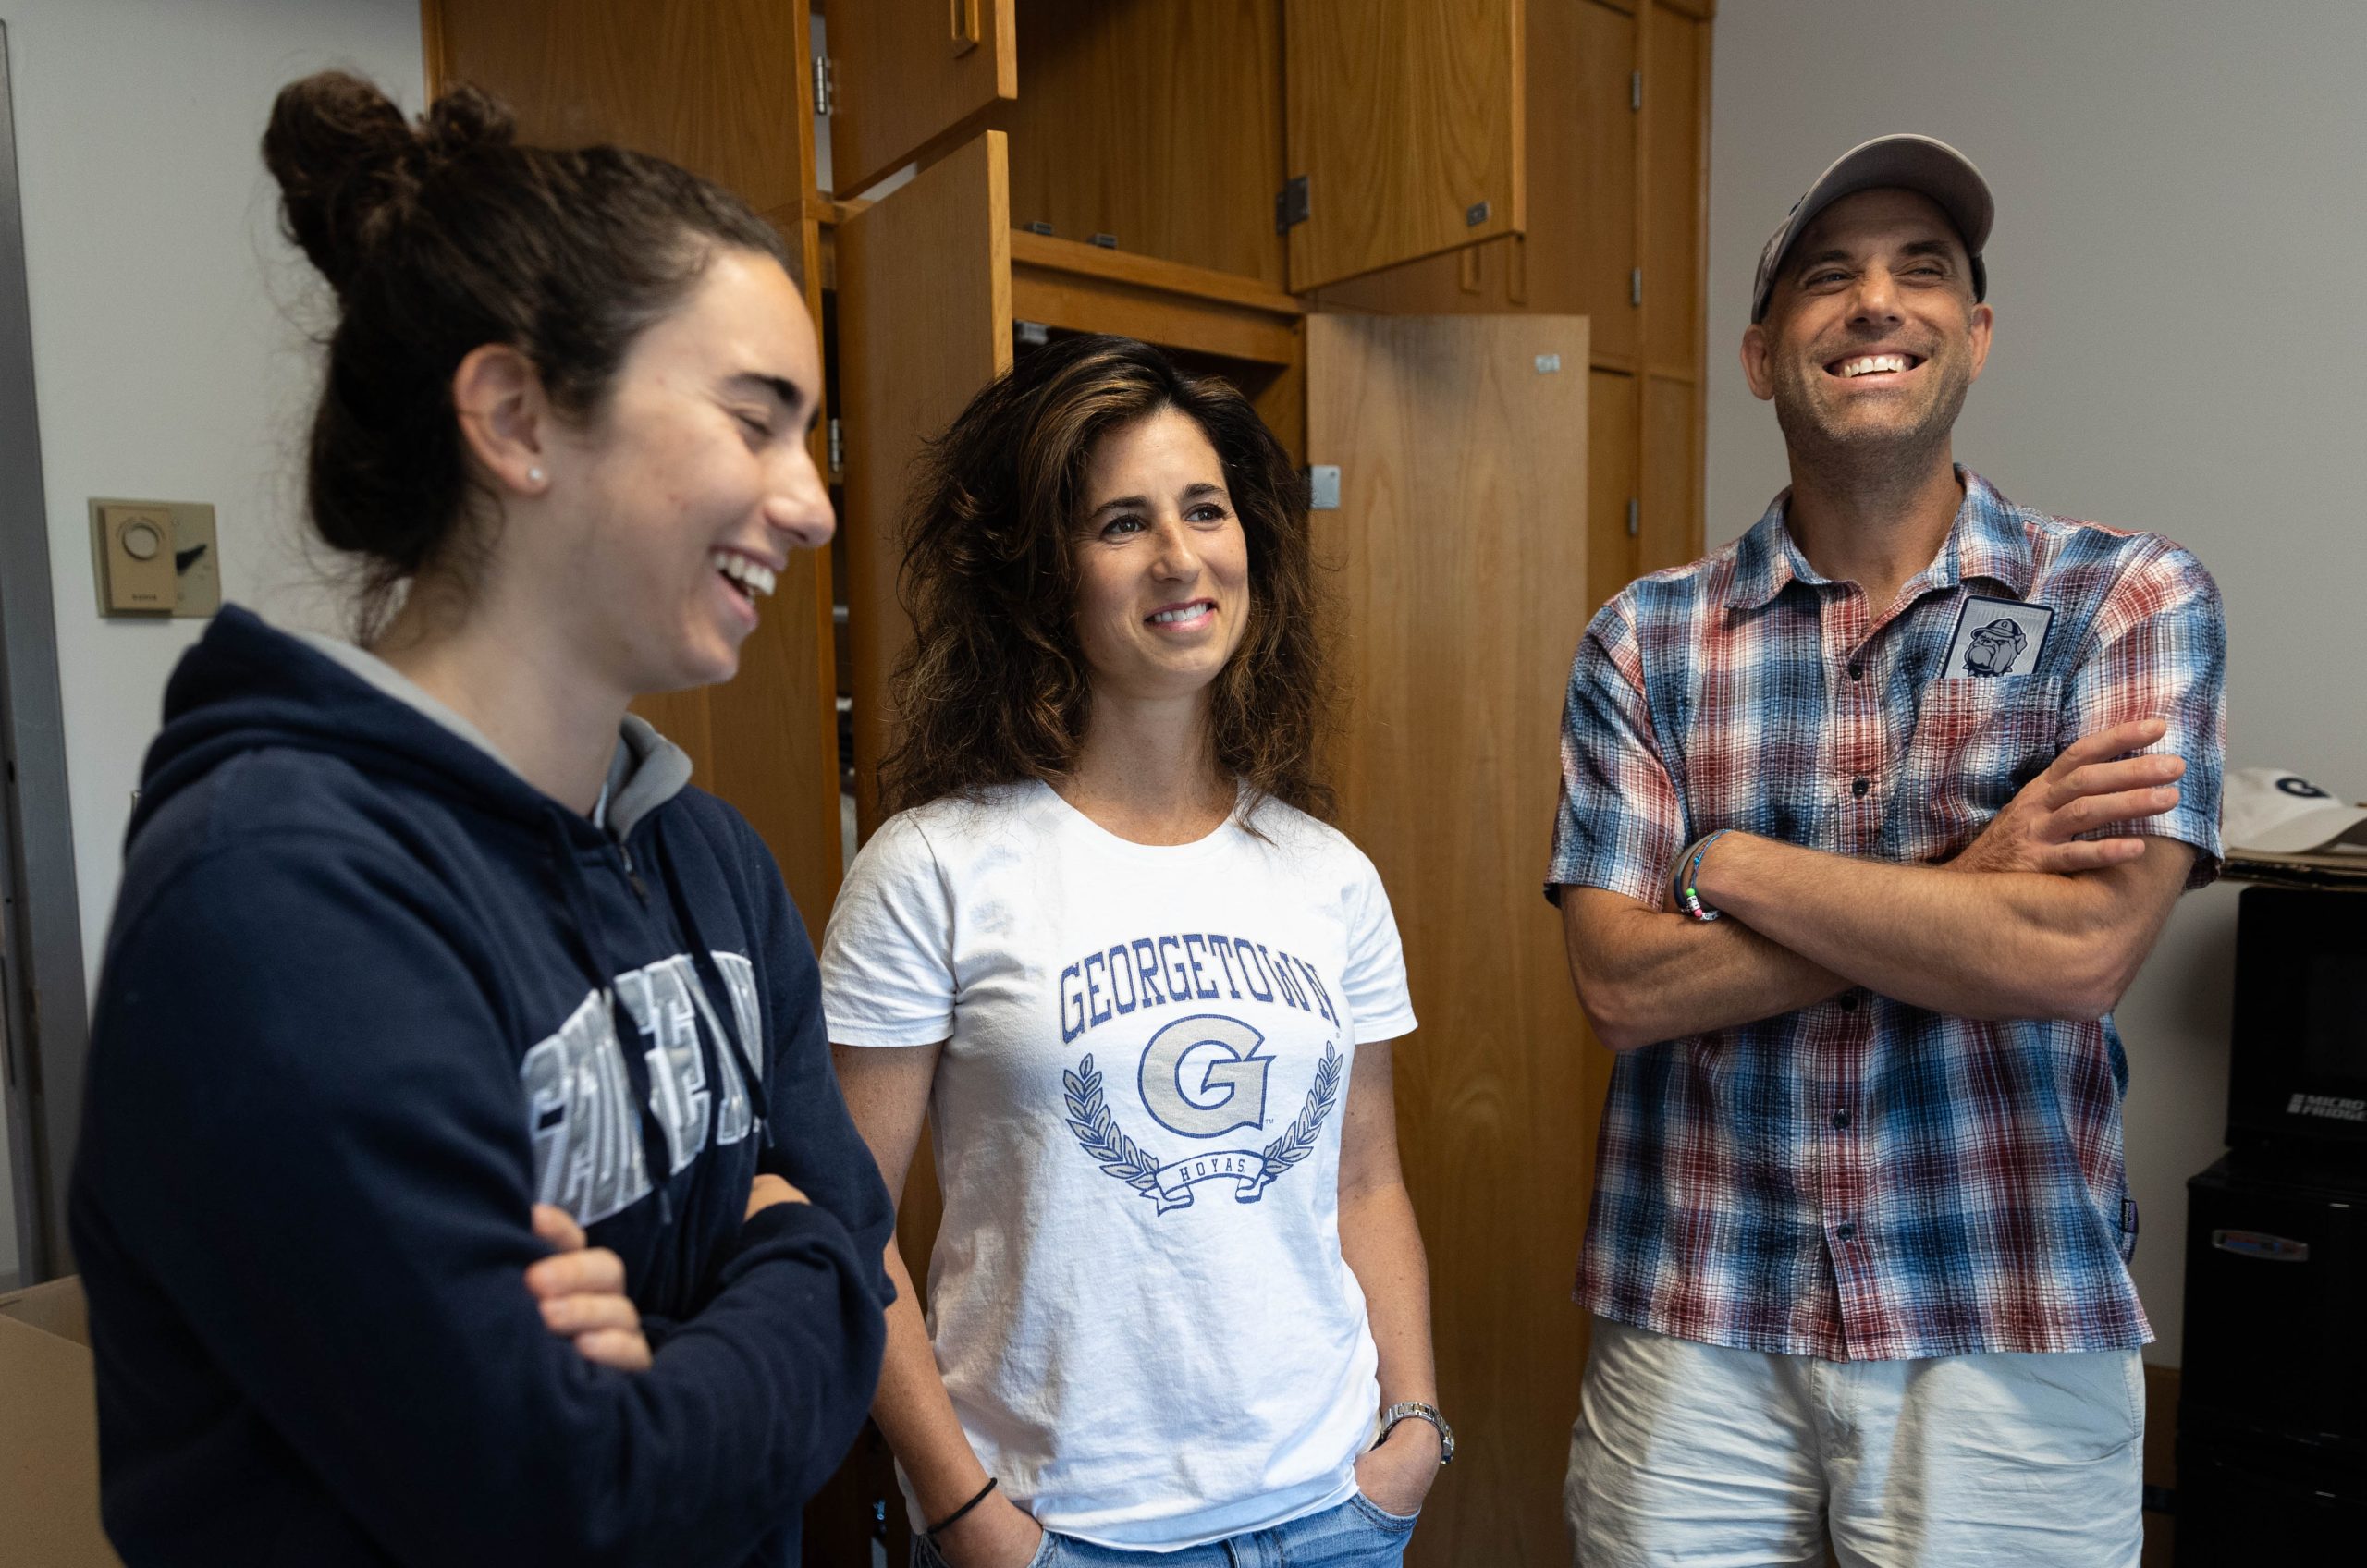 Two parents and their daughter stand together in a dorm room laughing. The daughter is wearing a navy blue Georgetown sweatshirt and the mom a white T-shirt with Georgetown's logo on it.